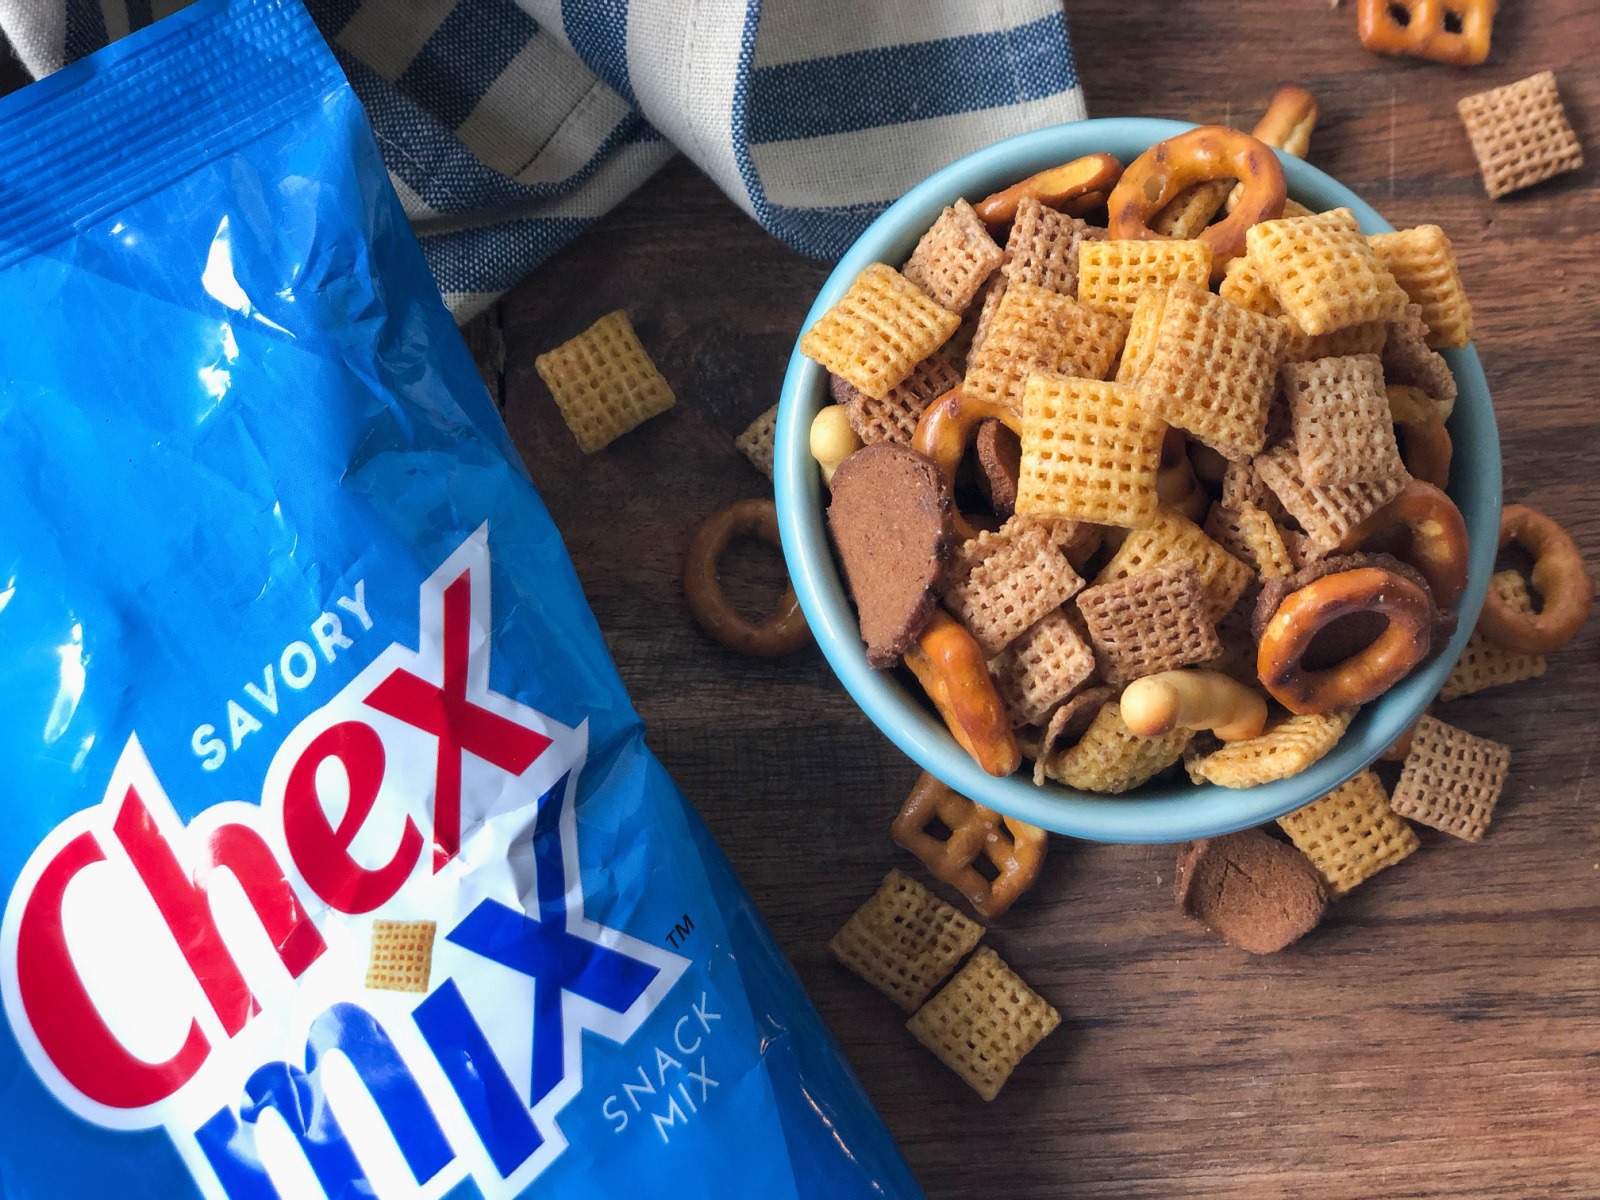 Get Family Size Bags Of Chex Mix For As Little As $1.85 Per Bag At Publix